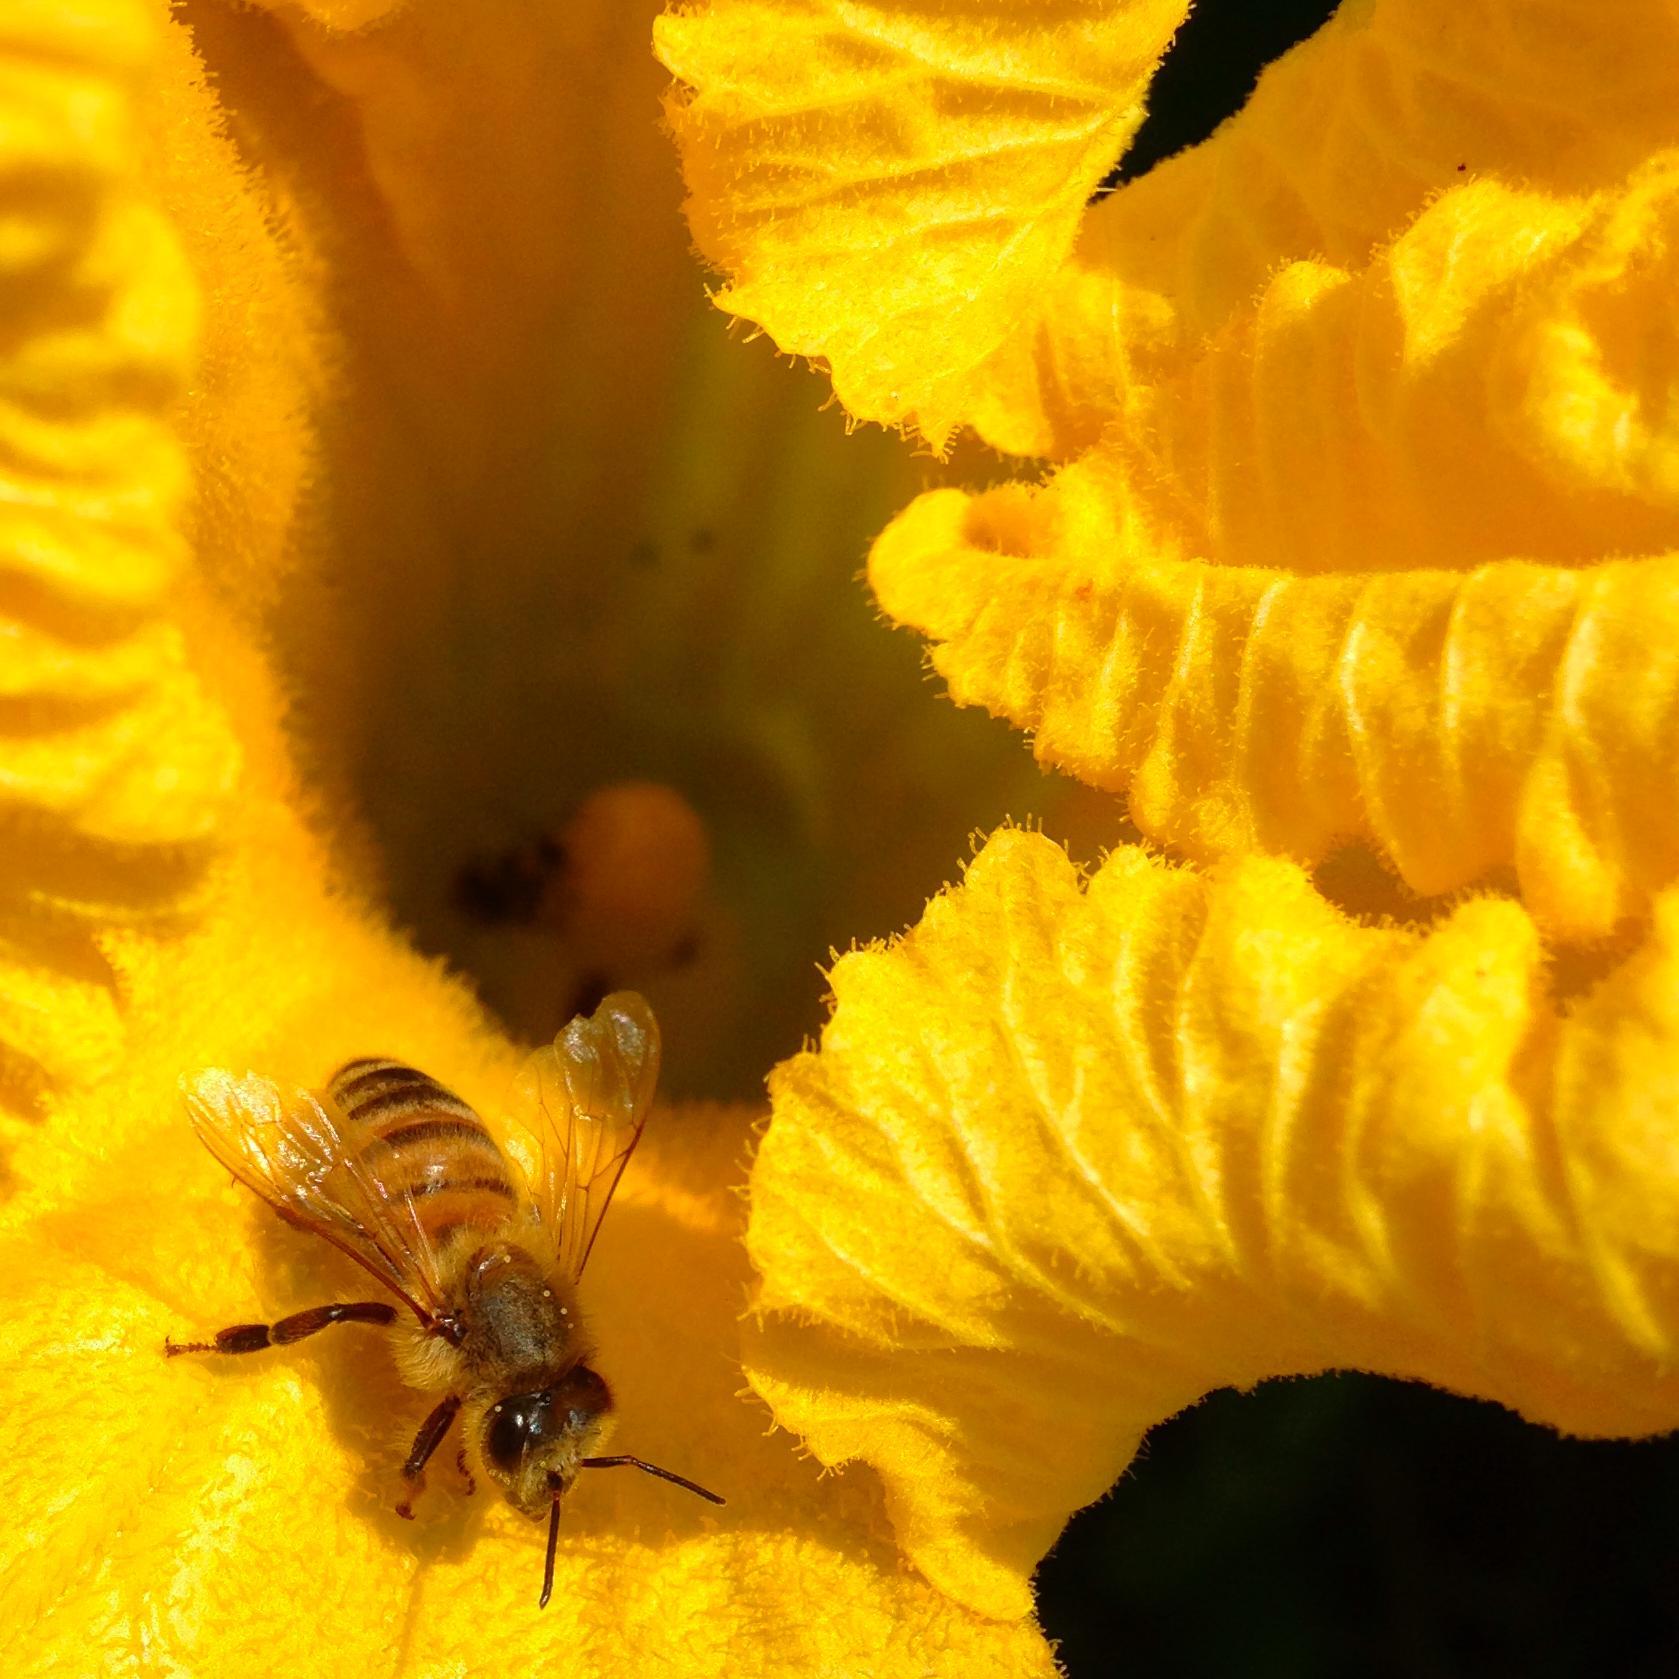 working toward a better Minnesota for pollinators and people